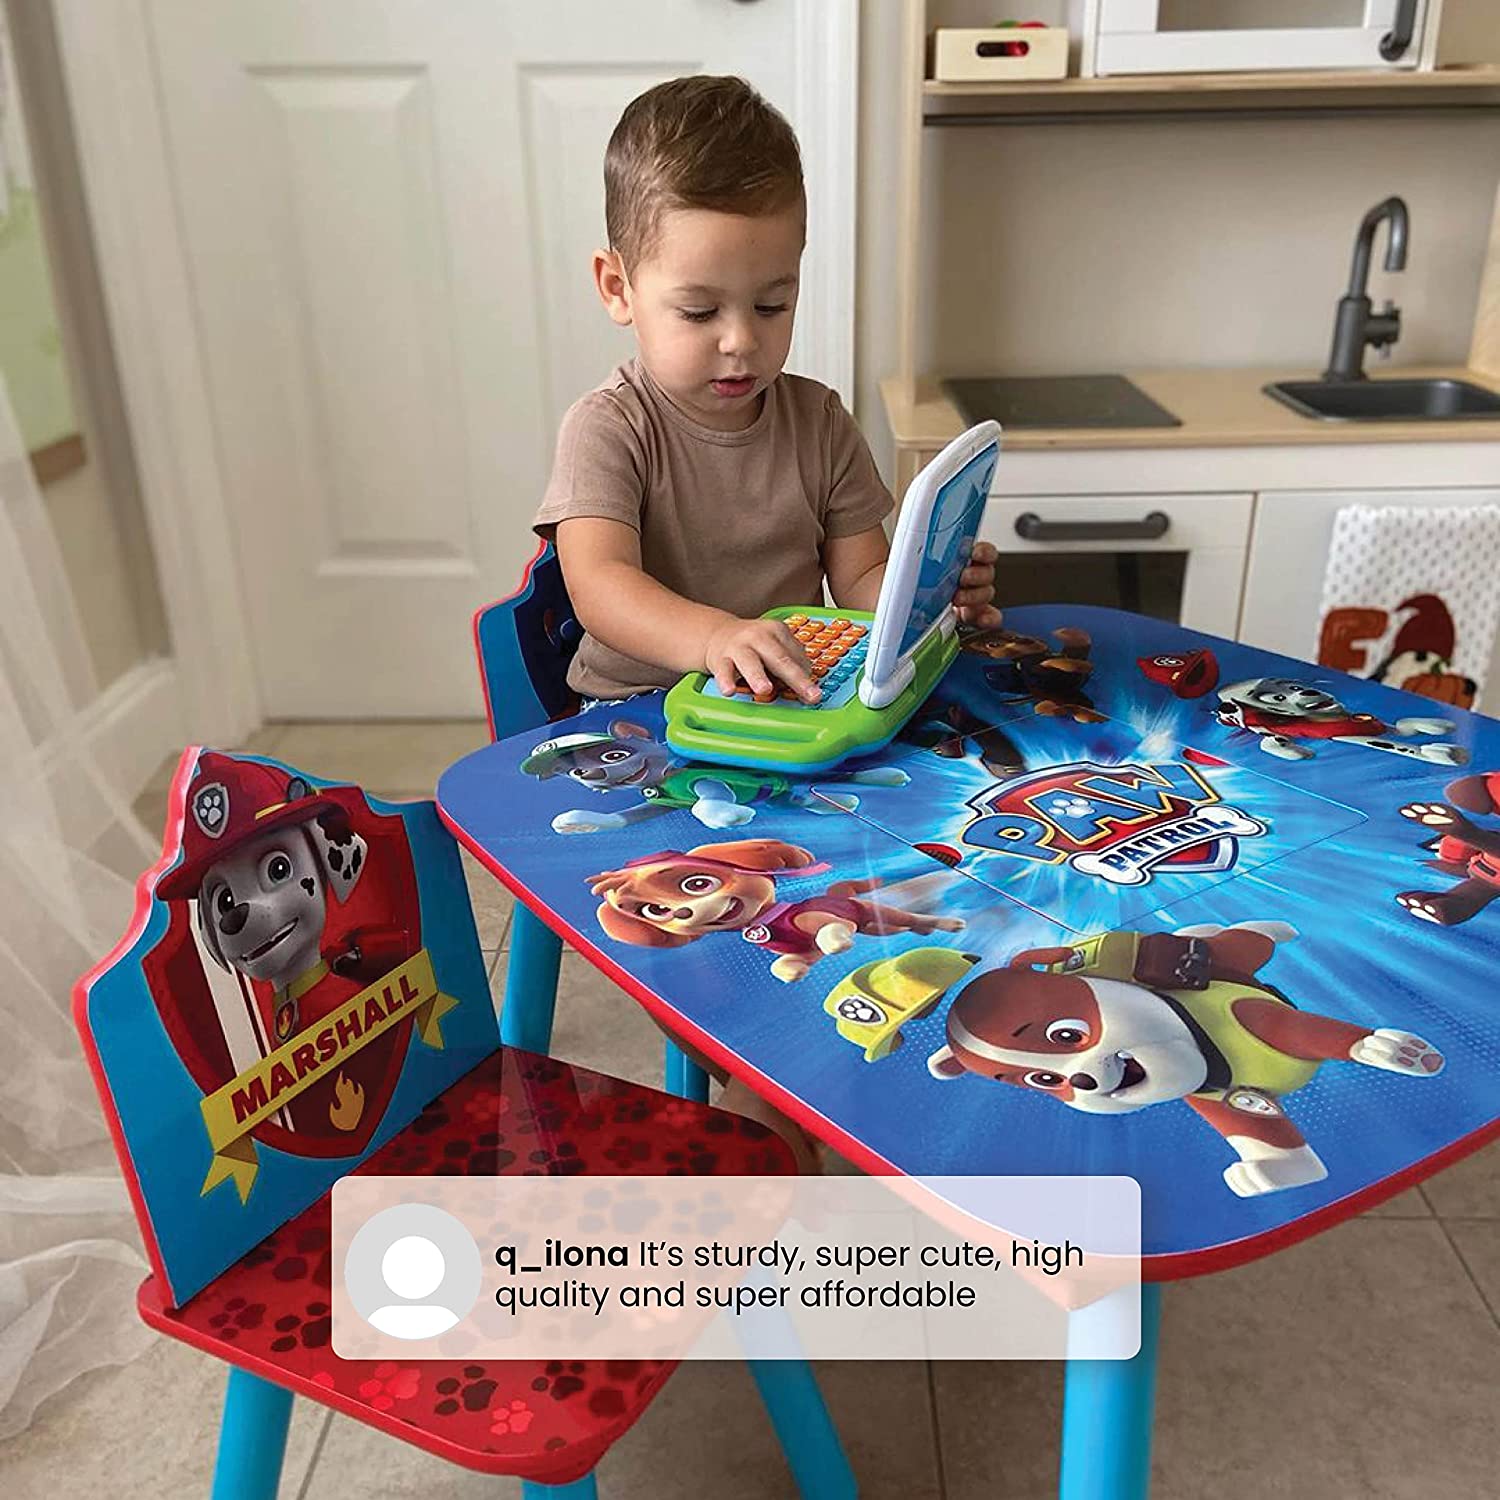 https://bigbigmart.com/wp-content/uploads/2023/05/Delta-Children-Kids-Table-and-Chair-Set-With-Storage-2-Chairs-Included-Ideal-for-Arts-Crafts-Snack-Time-Homeschooling-Homework-More-Nick-Jr.-PAW-Patrol5.jpg